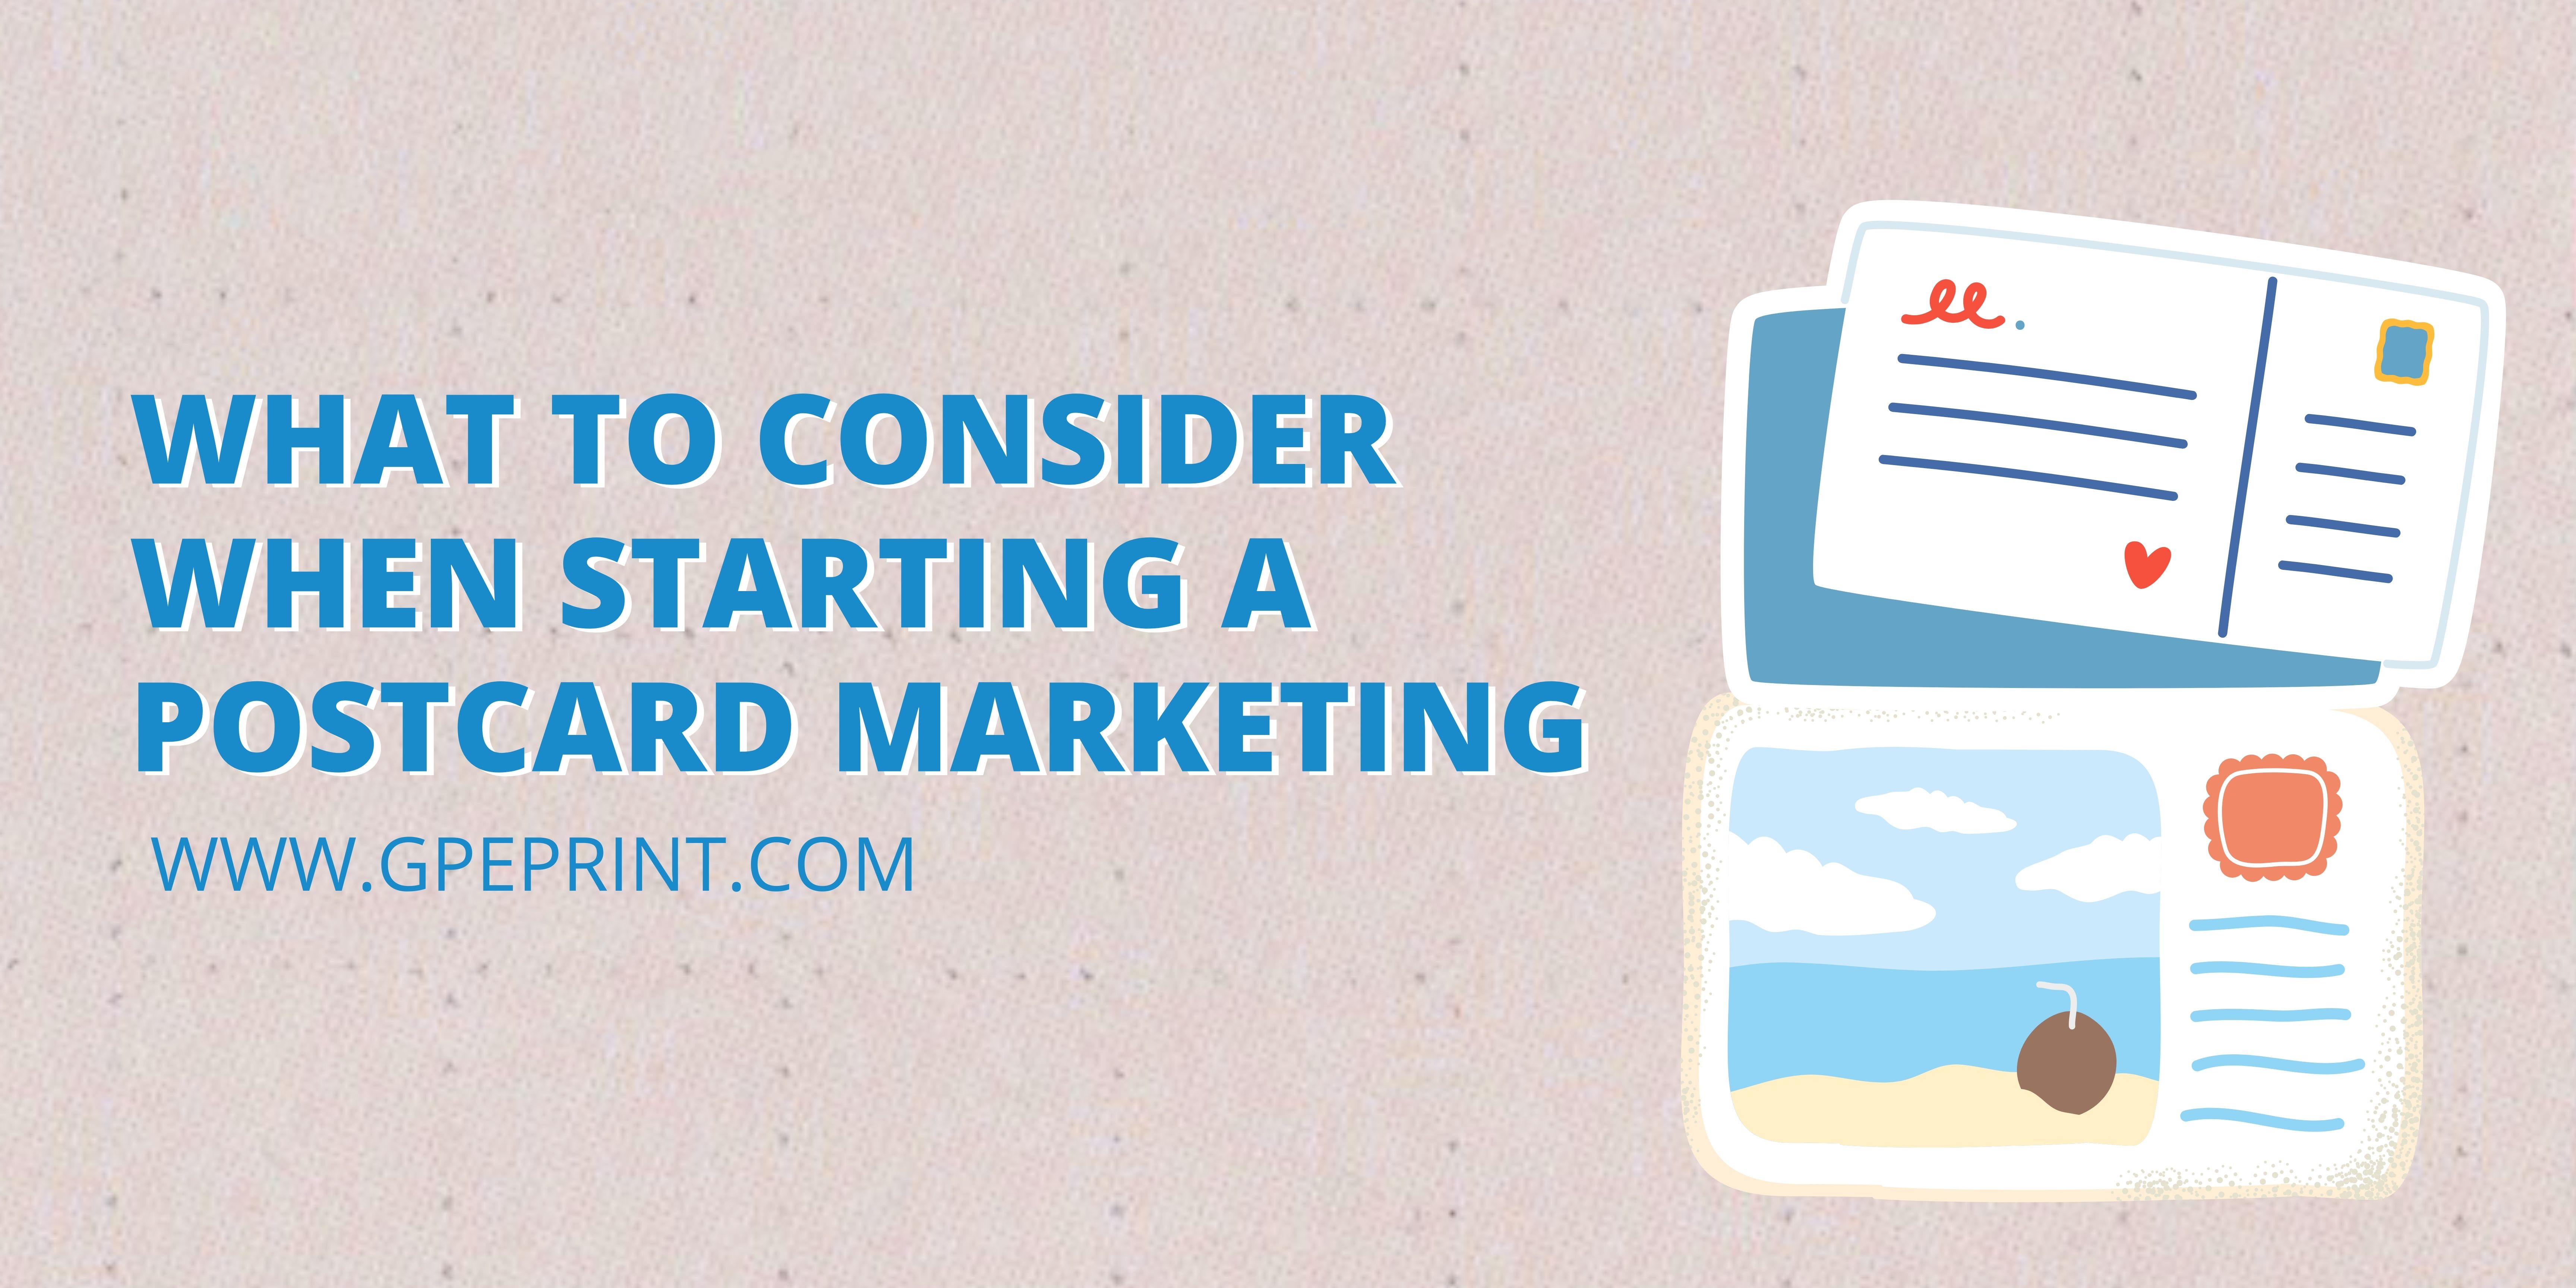 What To Consider When Starting a Postcard Marketing